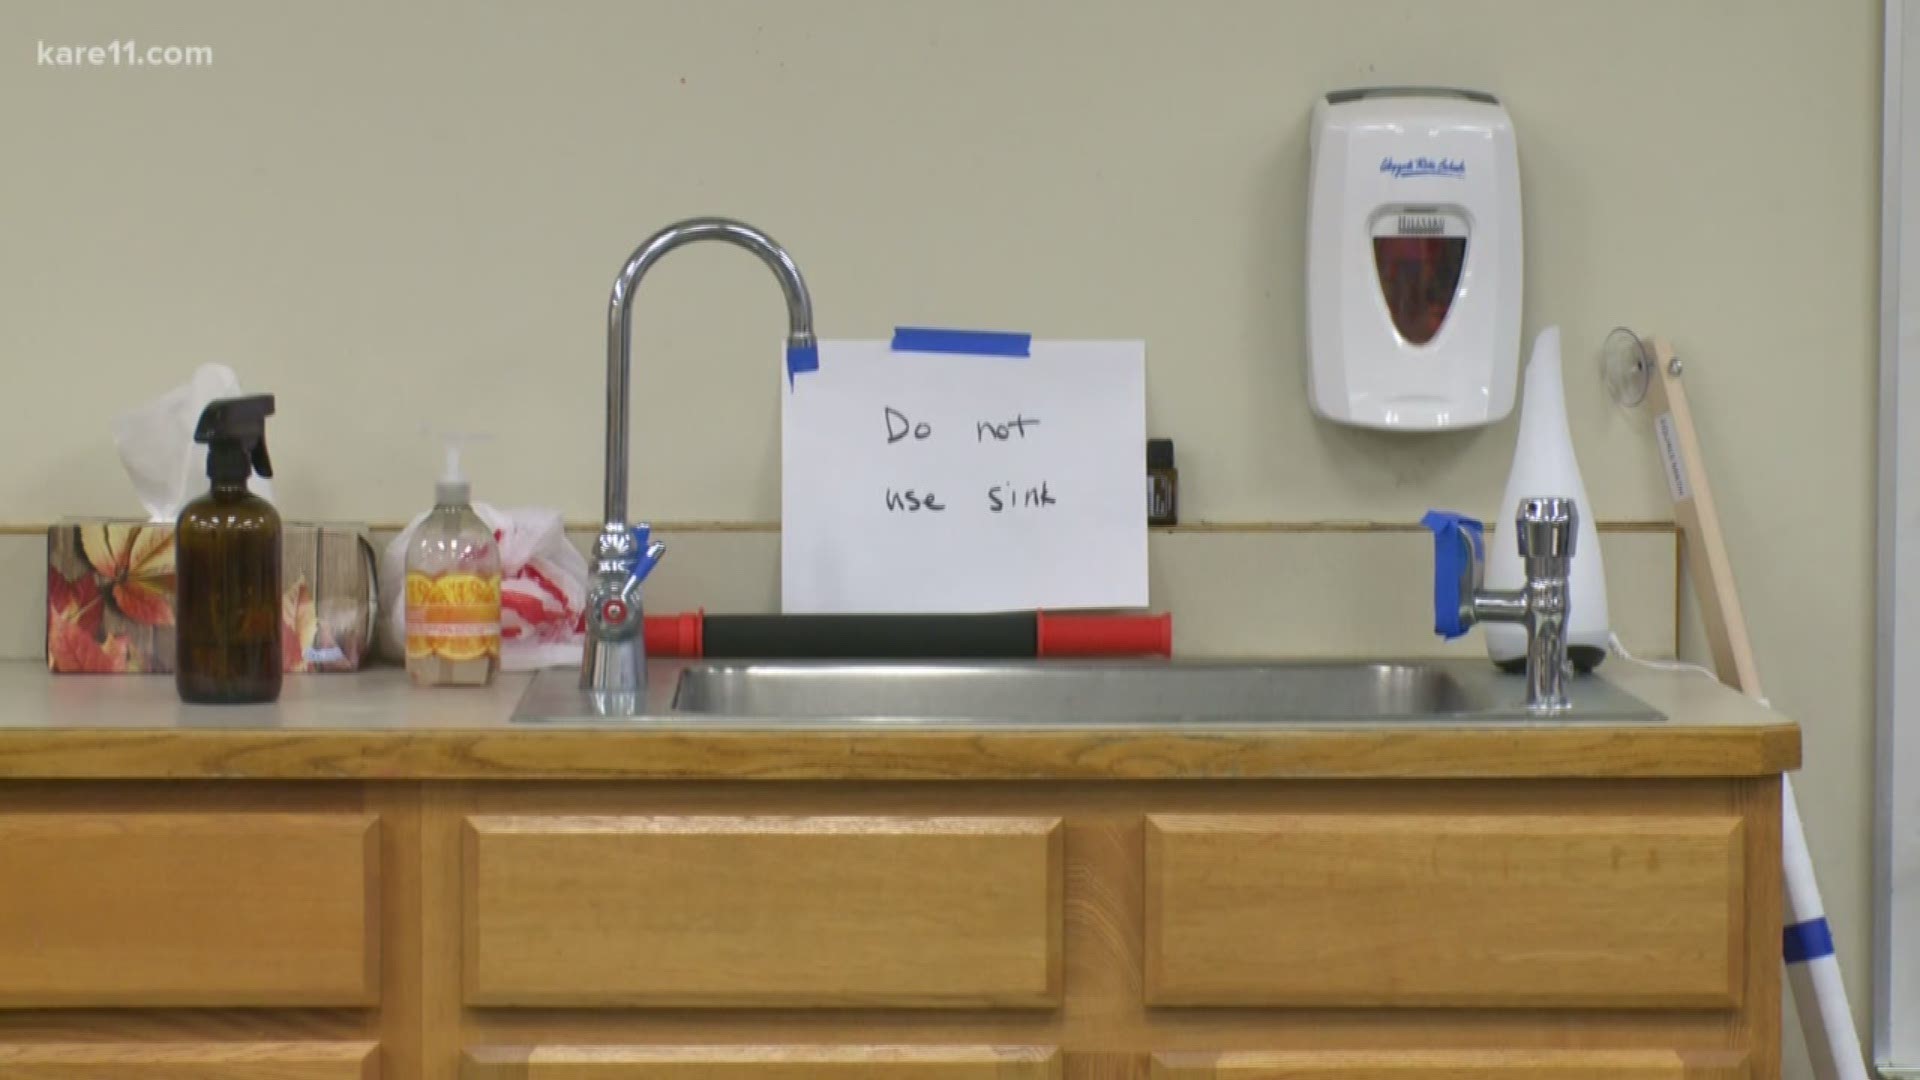 Wayzata Public Schools is taking action after high levels of lead were found in the water at multiple schools. The testing was done on every faucet that could be used for drinking or cooking water.